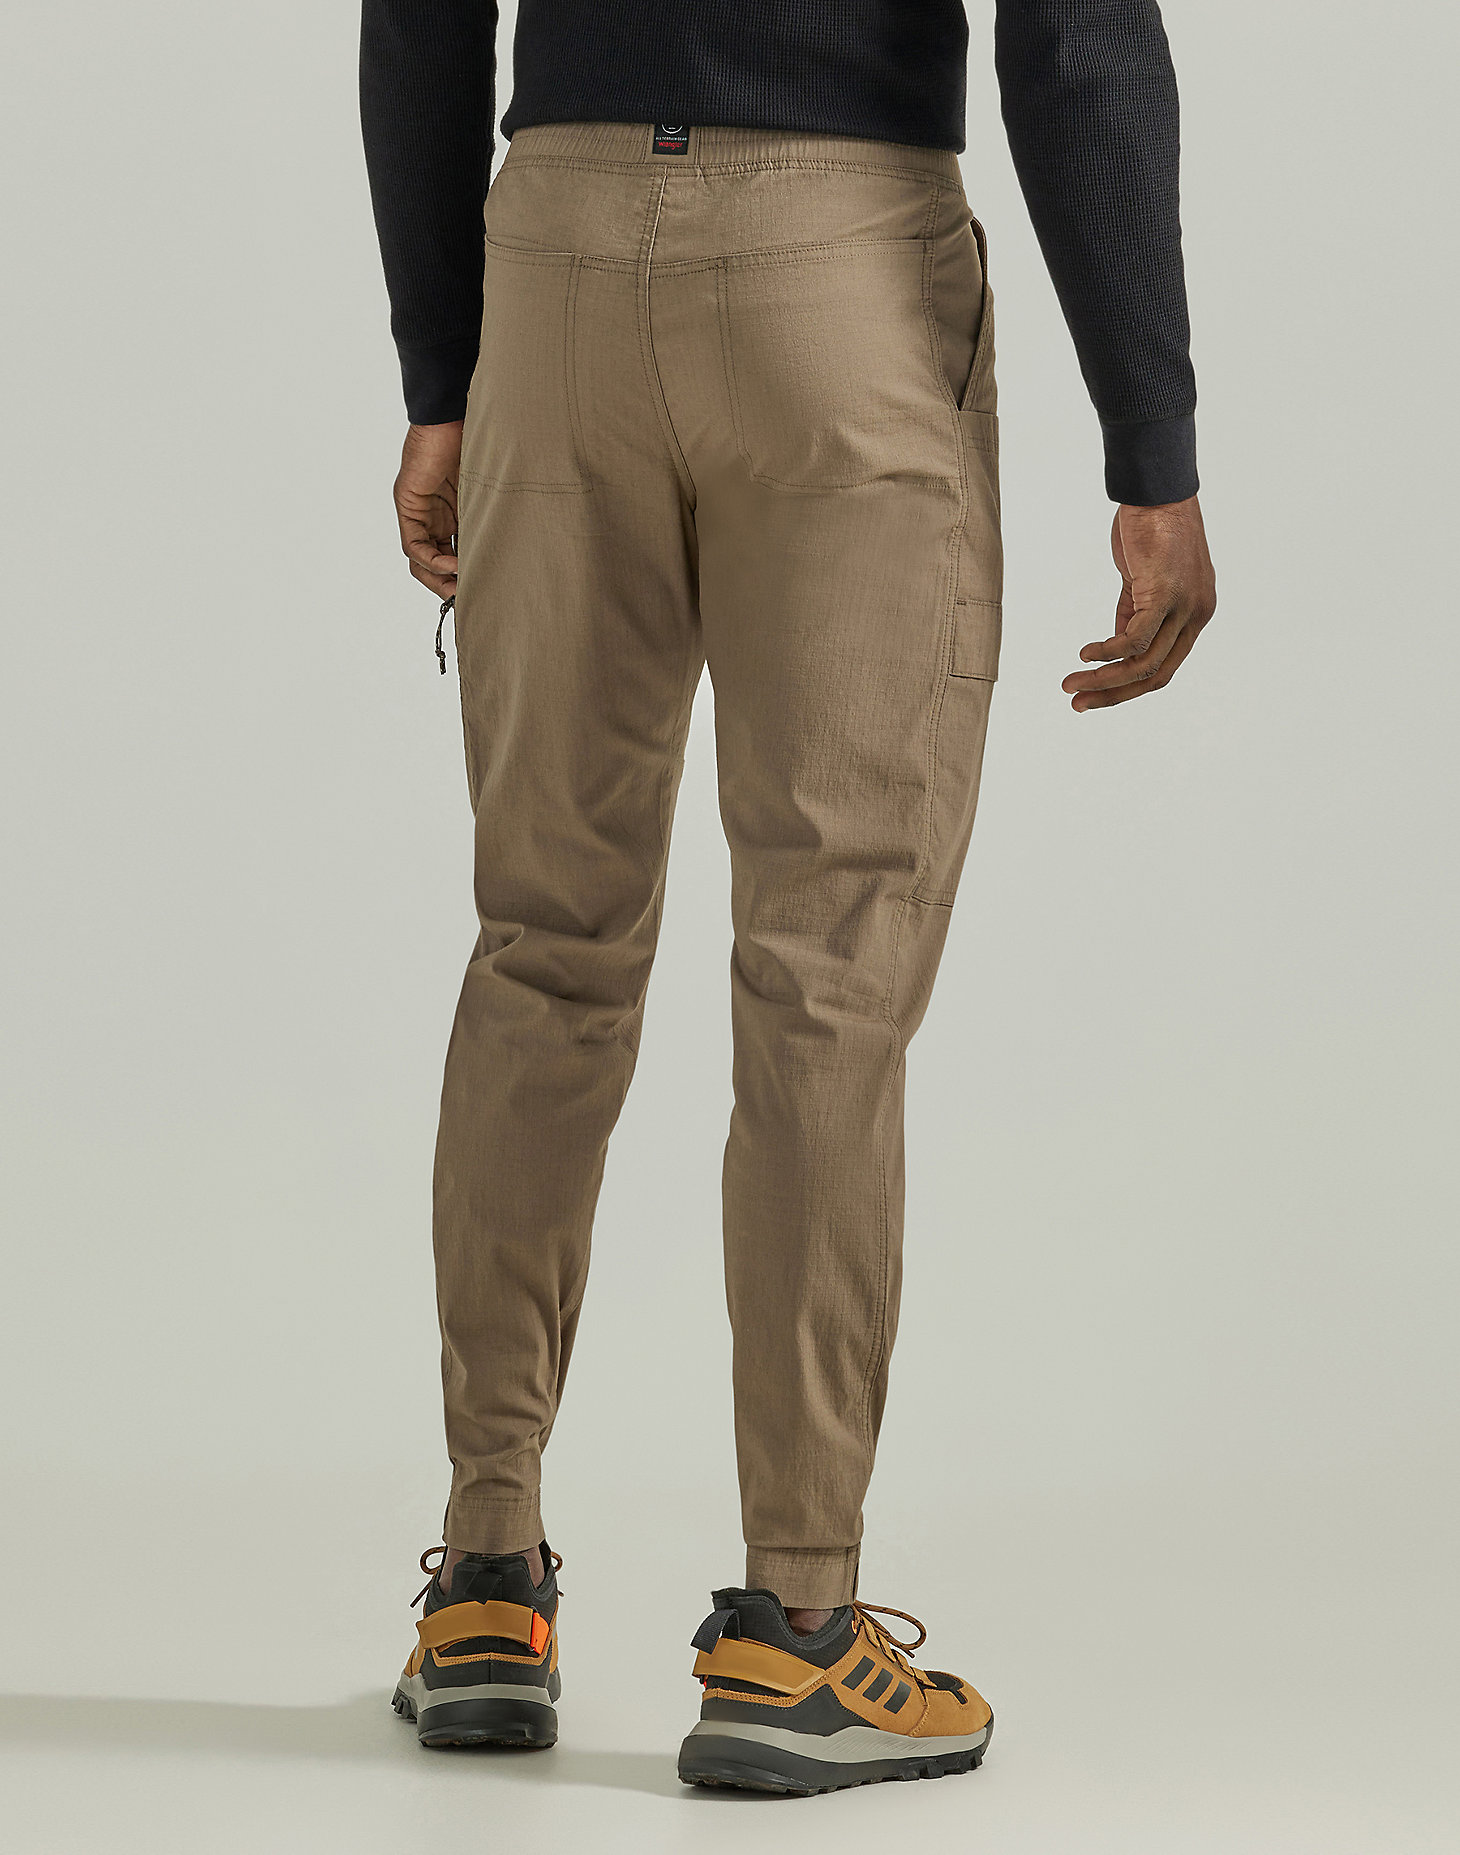 Pull On Tapered Pant in Bungee Cord alternative view 1